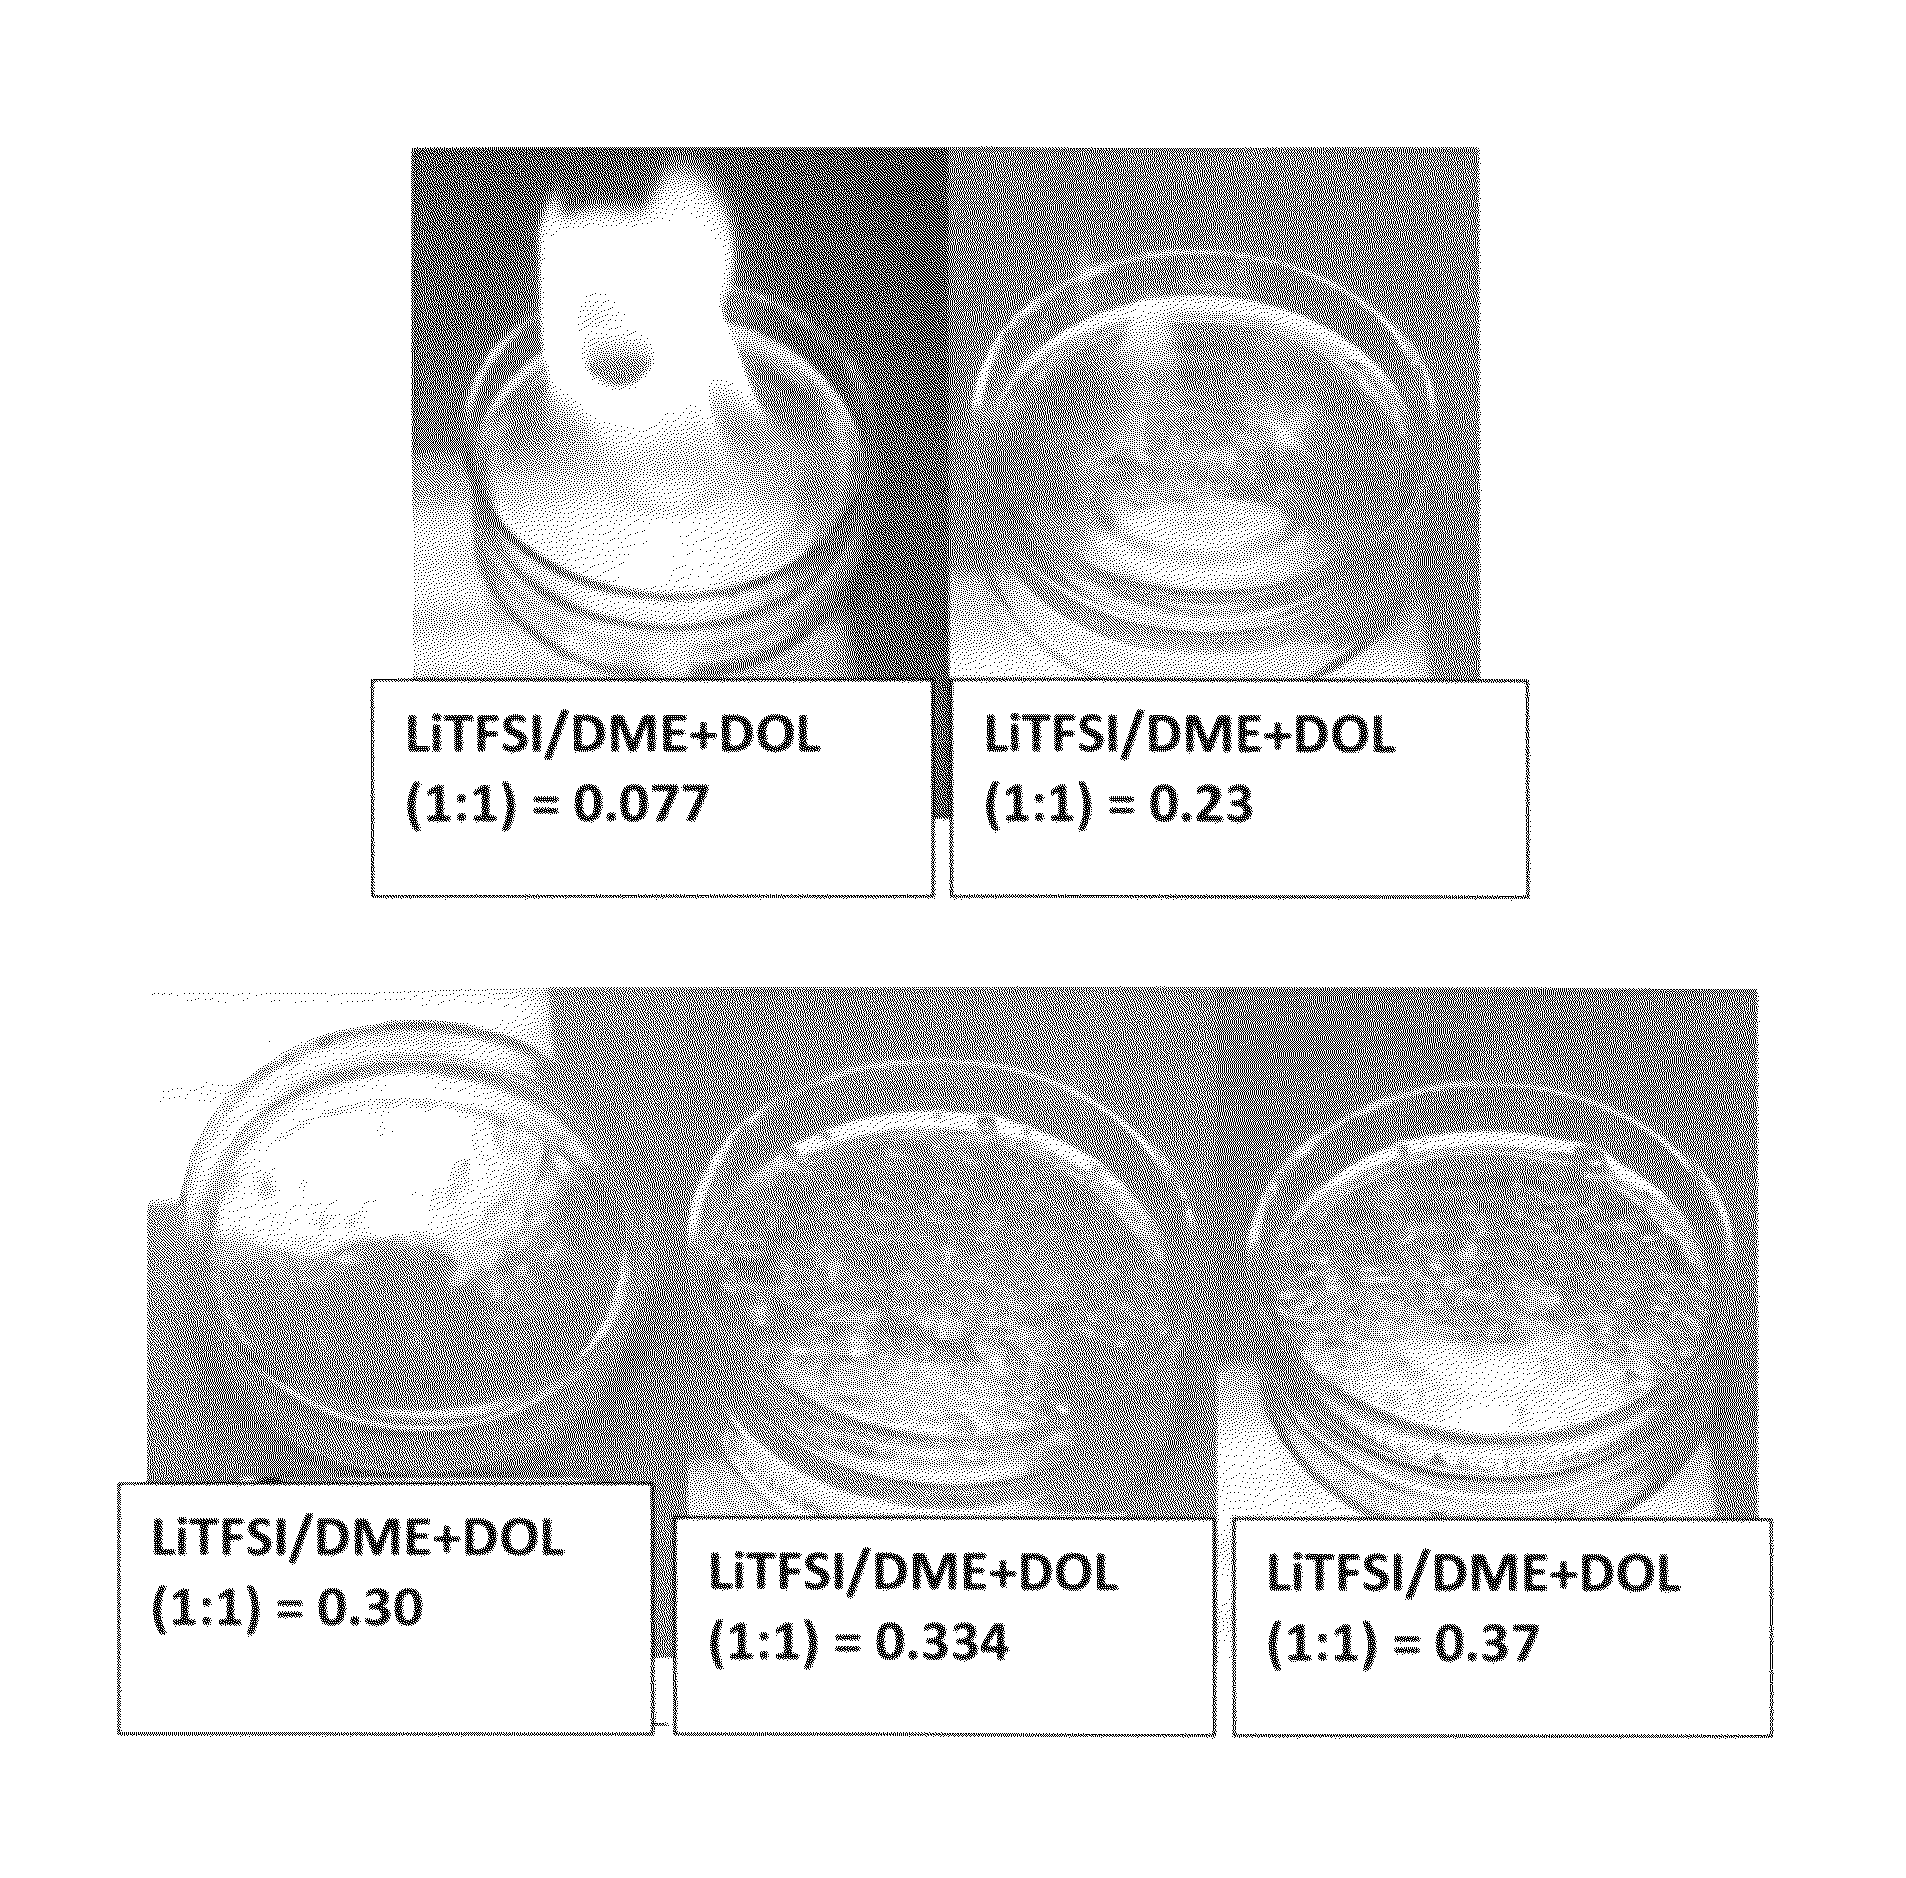 Lithium secondary batteries containing non-flammable quasi-solid electrolyte